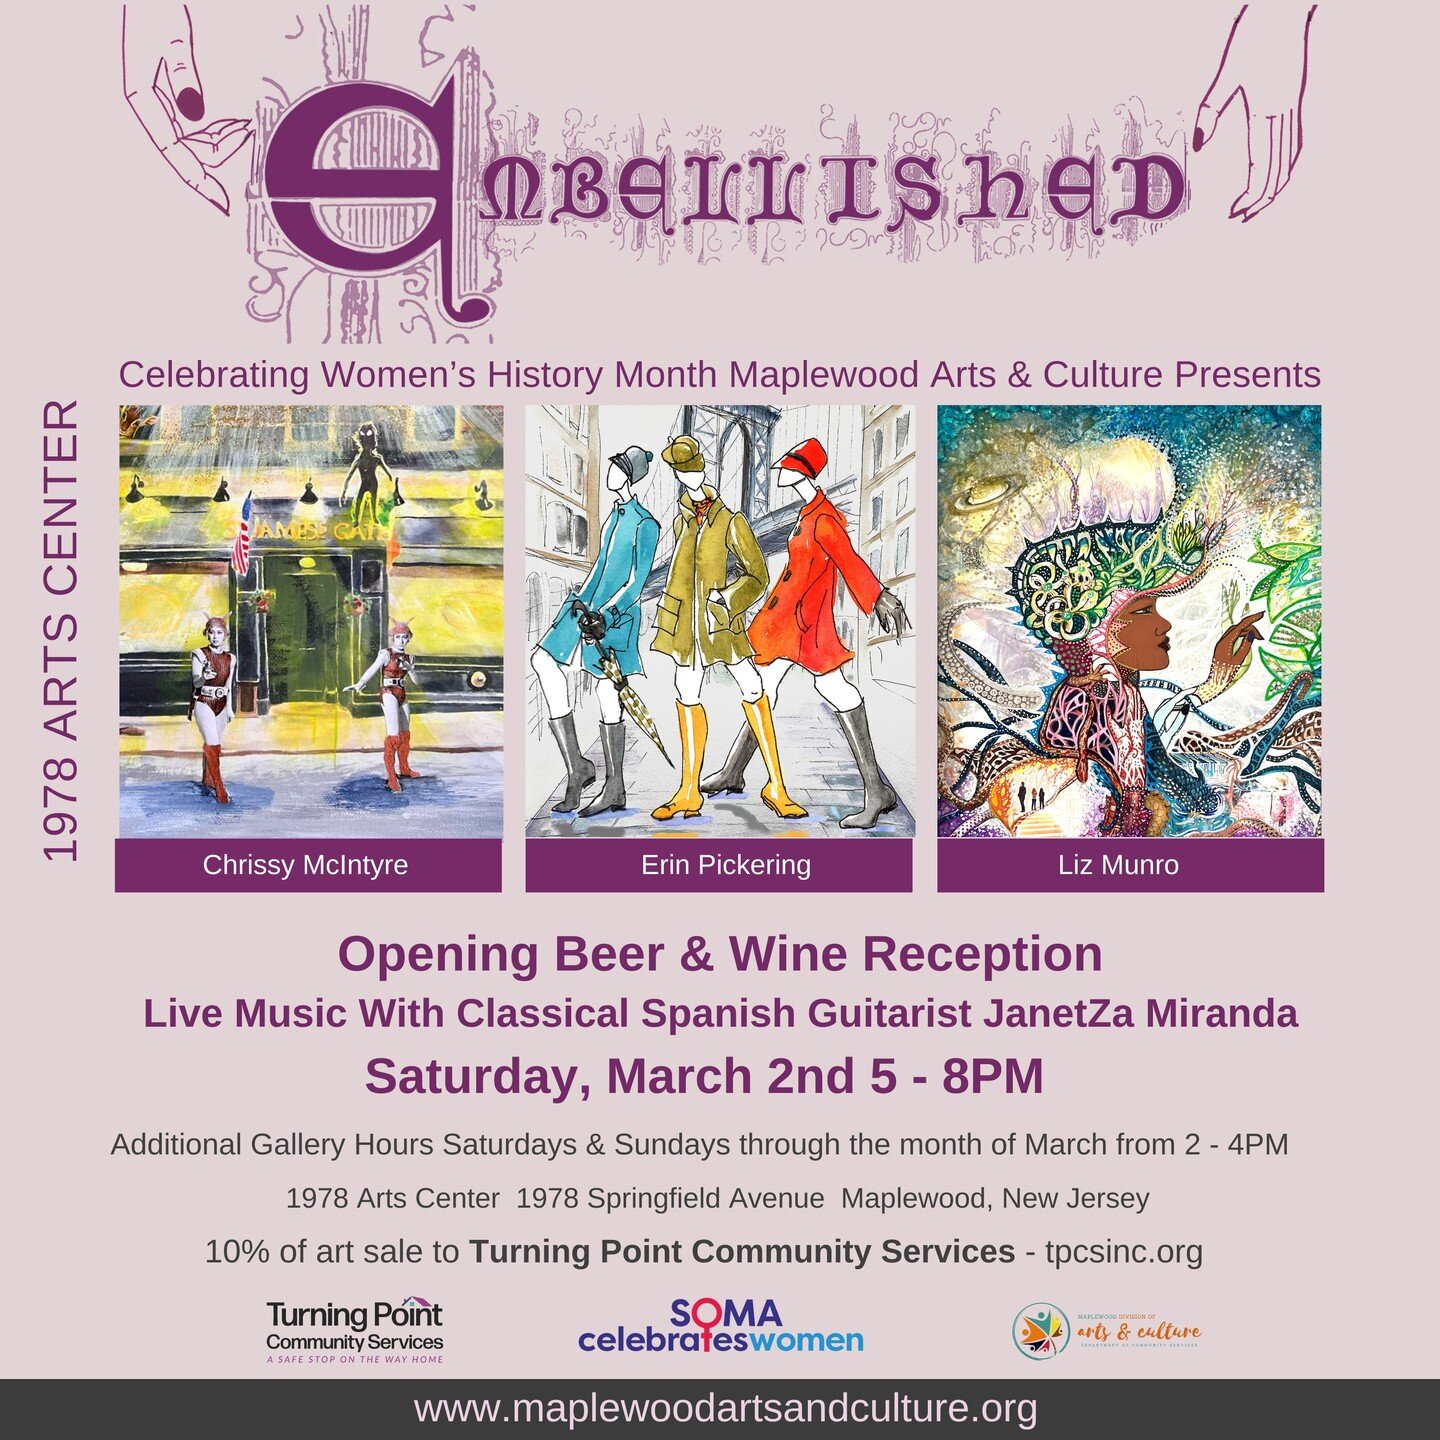 Opening Reception Today 5PM - 8PM!

In Celebration of Women&rsquo;s History Month, we are thrilled to showcase 3 artists for the upcoming 1978 Art Exhibition &quot;Embellished&quot;. The exhibit will feature enriched, enhanced &amp; decorative work
b